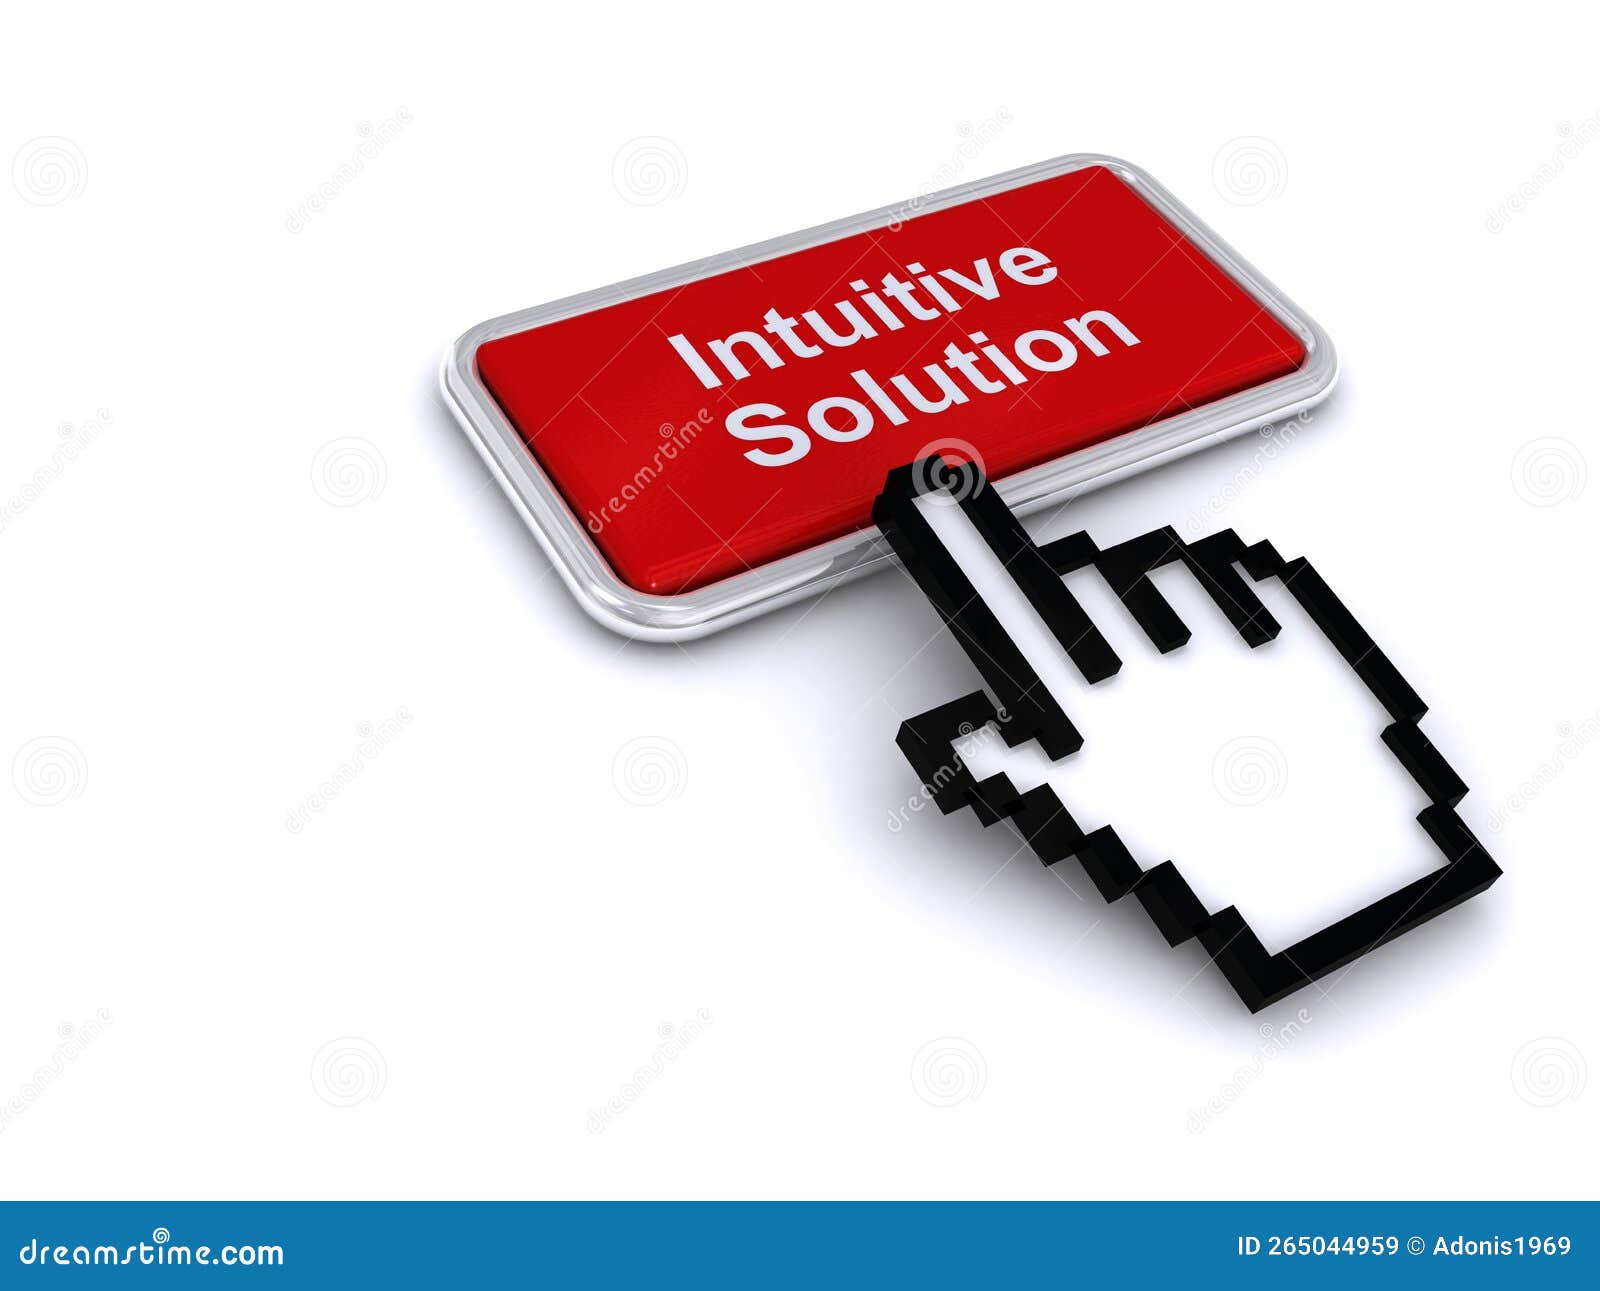 intuitive solution button on white